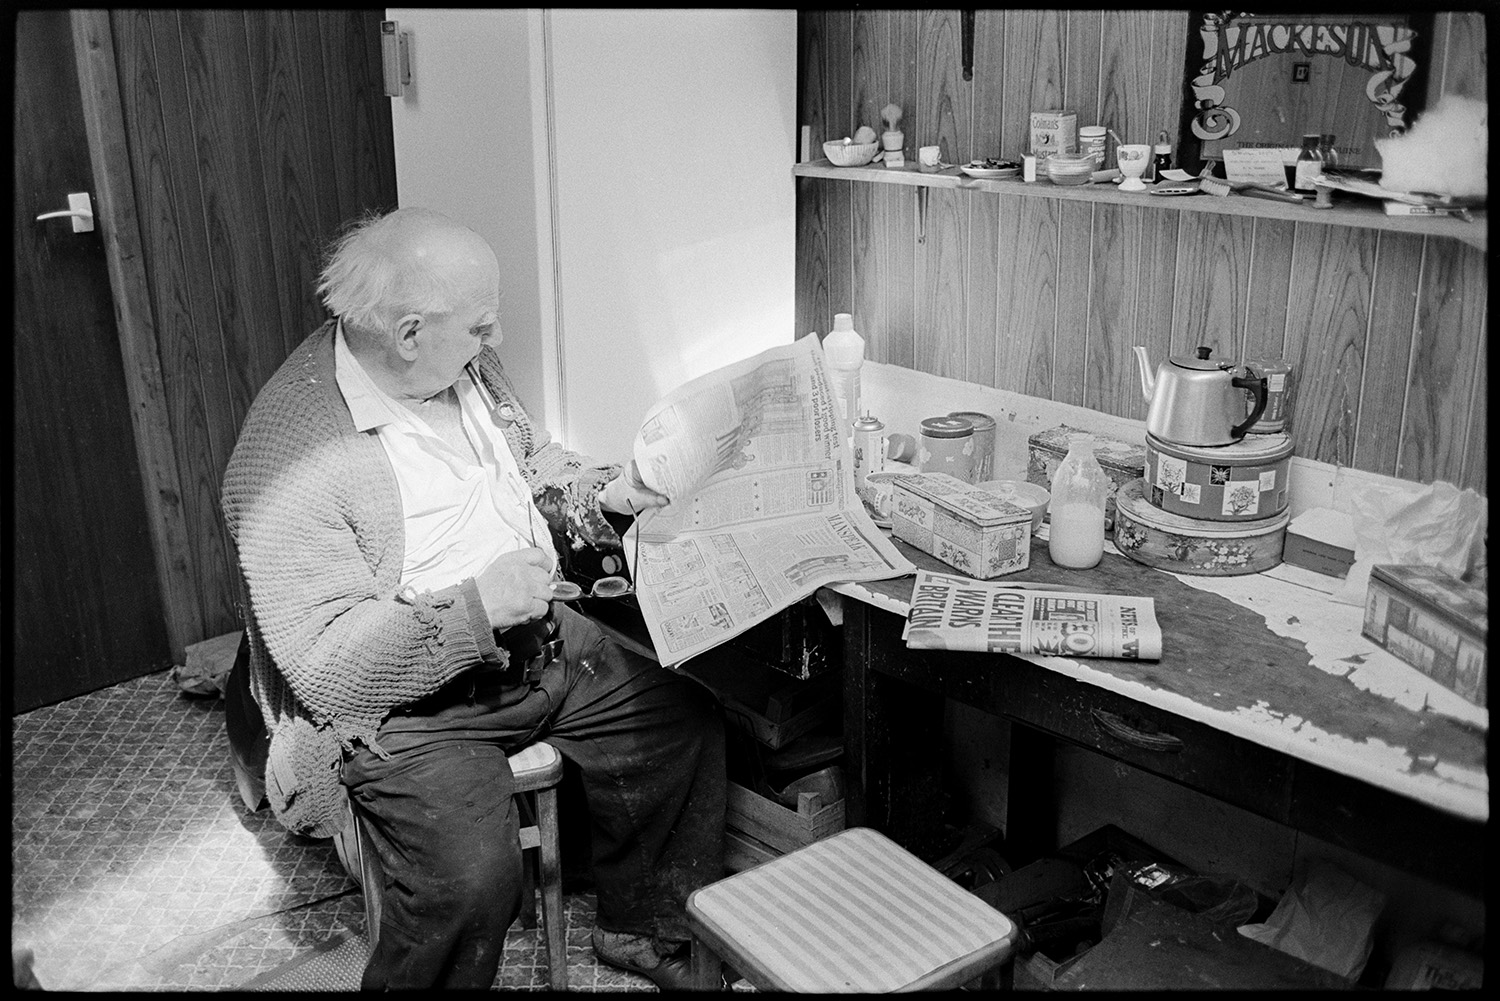 Man reading newspaper in his kitchen. 
[Archie Parkhouse reading a Sunday newspaper in his kitchen at West Lane, Dolton. He is smoking a pipe and holding a pair of glasses. Cake tins, a teapot and a bottle of milk are on the table in front of him.]